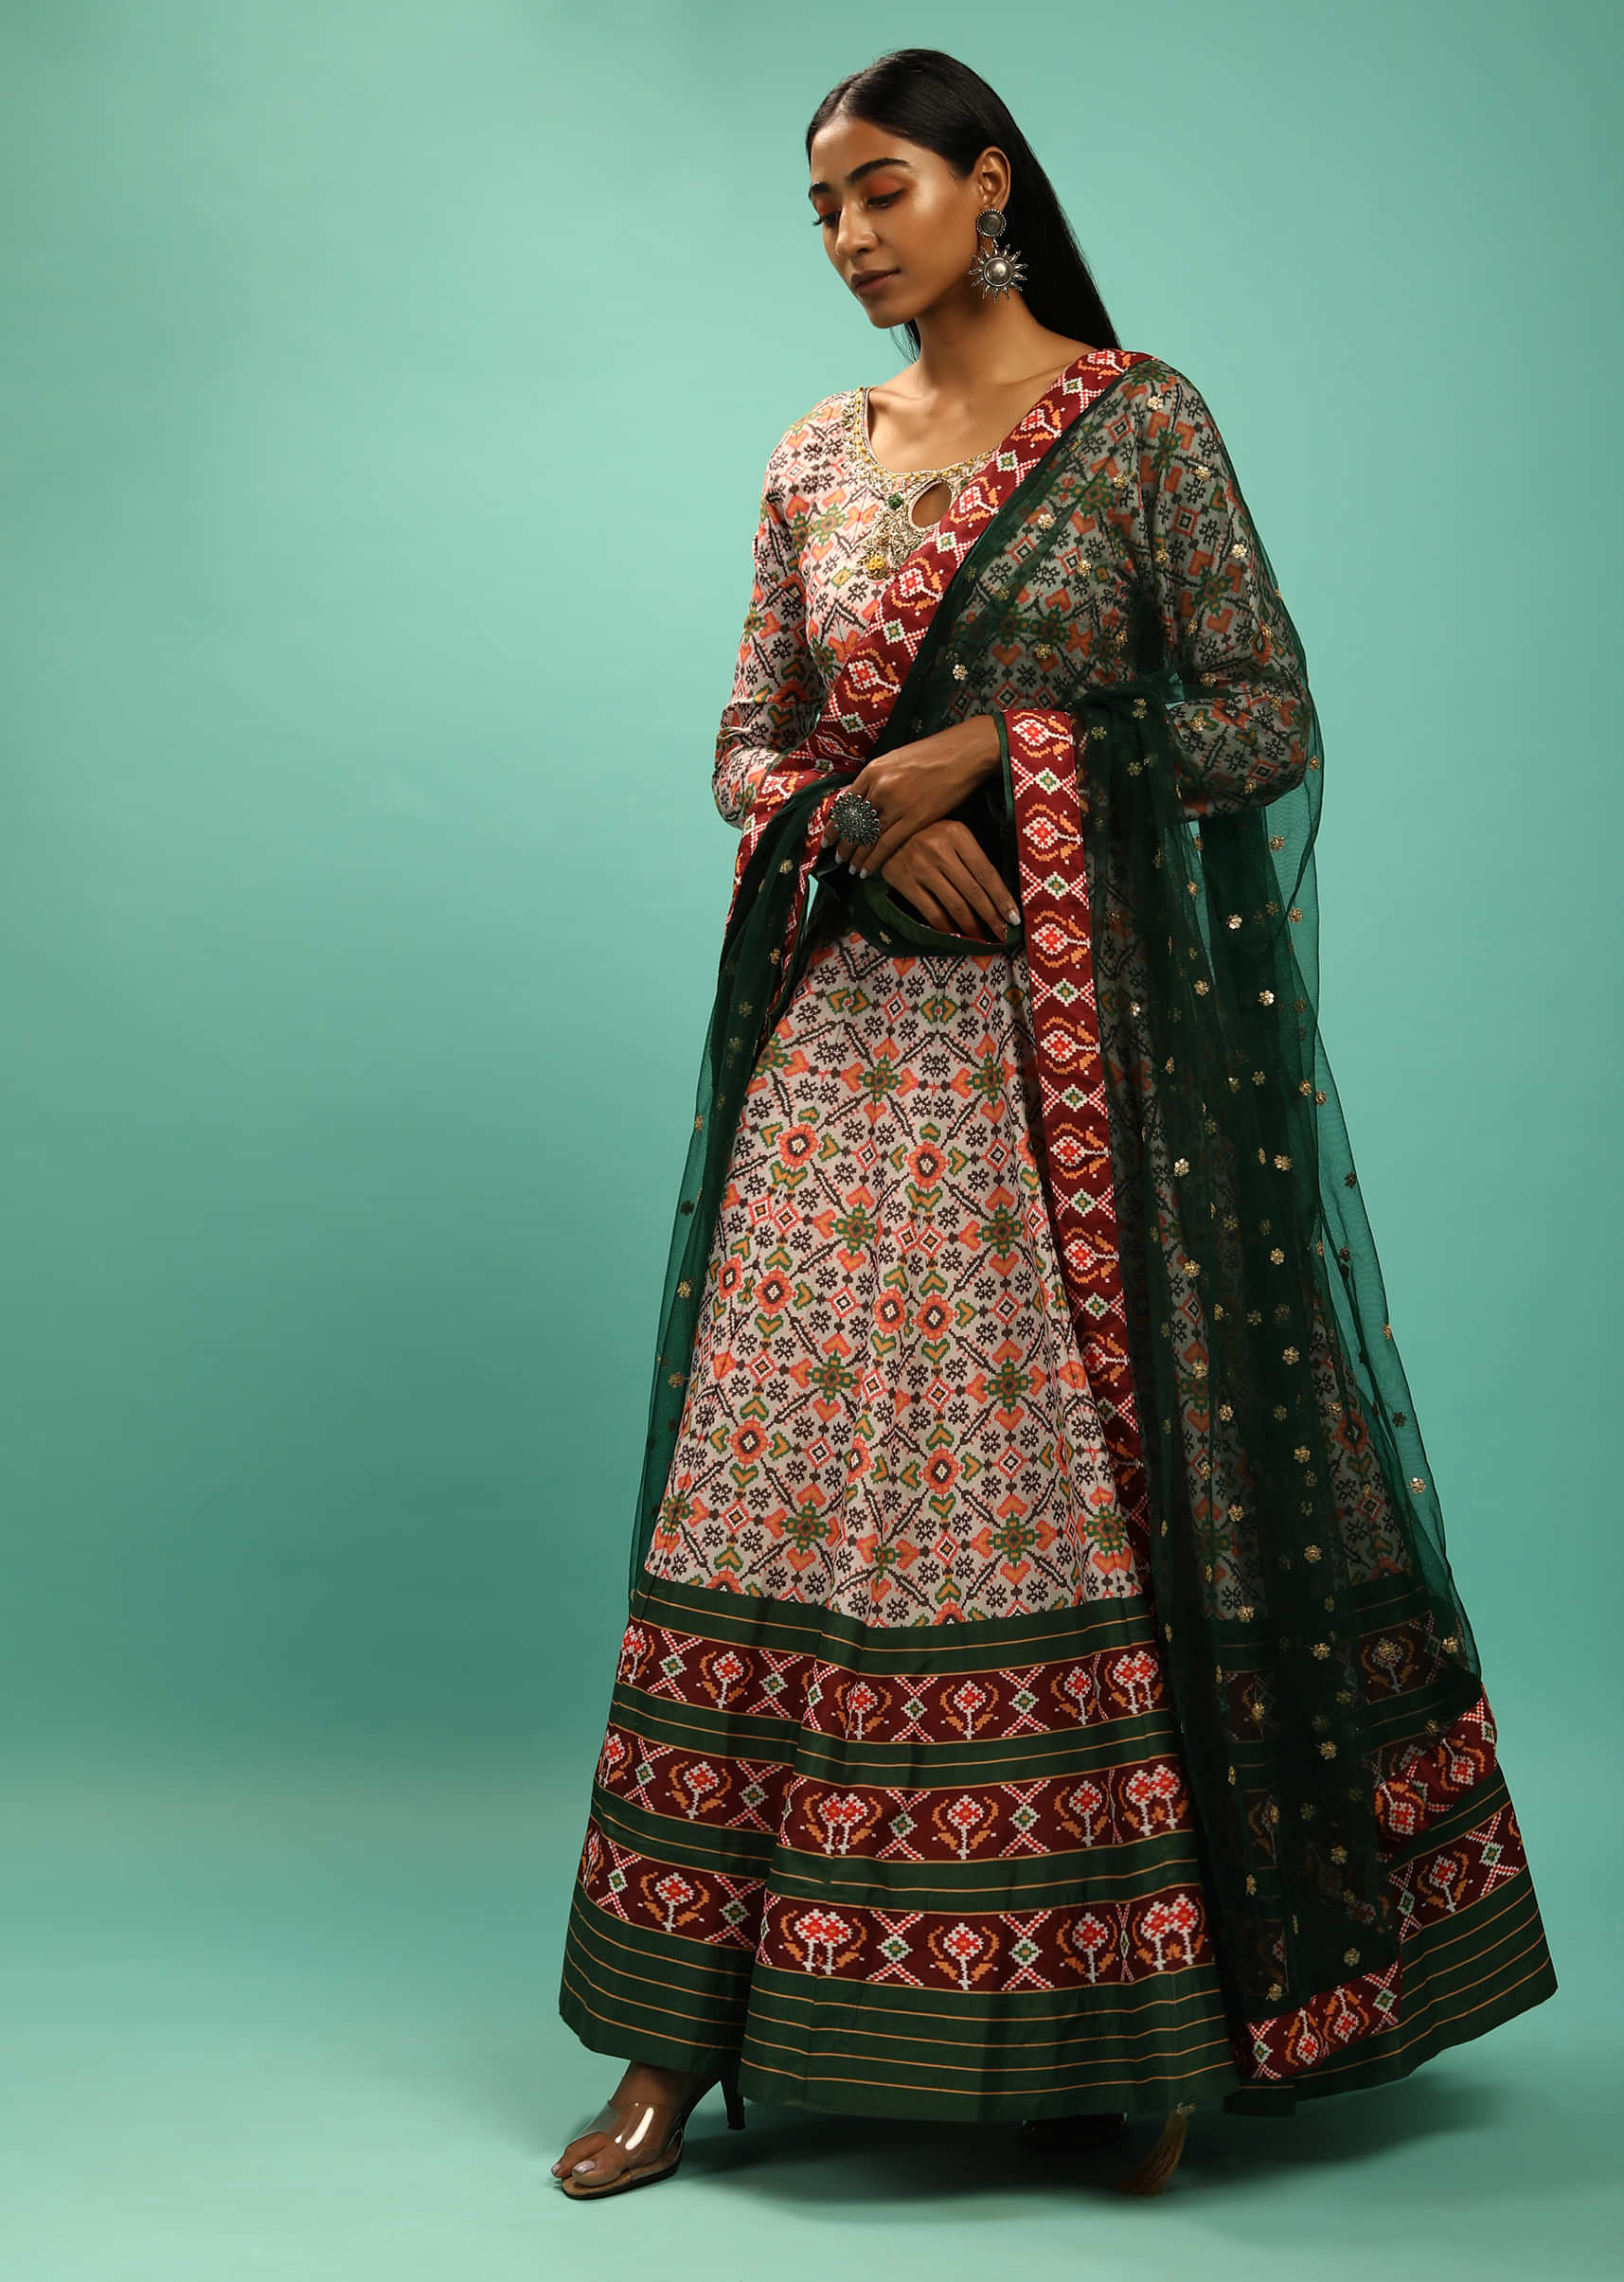 Desert Ivory Anarkali Suit With Multi Colored Patola Print And Zardosi Embroidery  